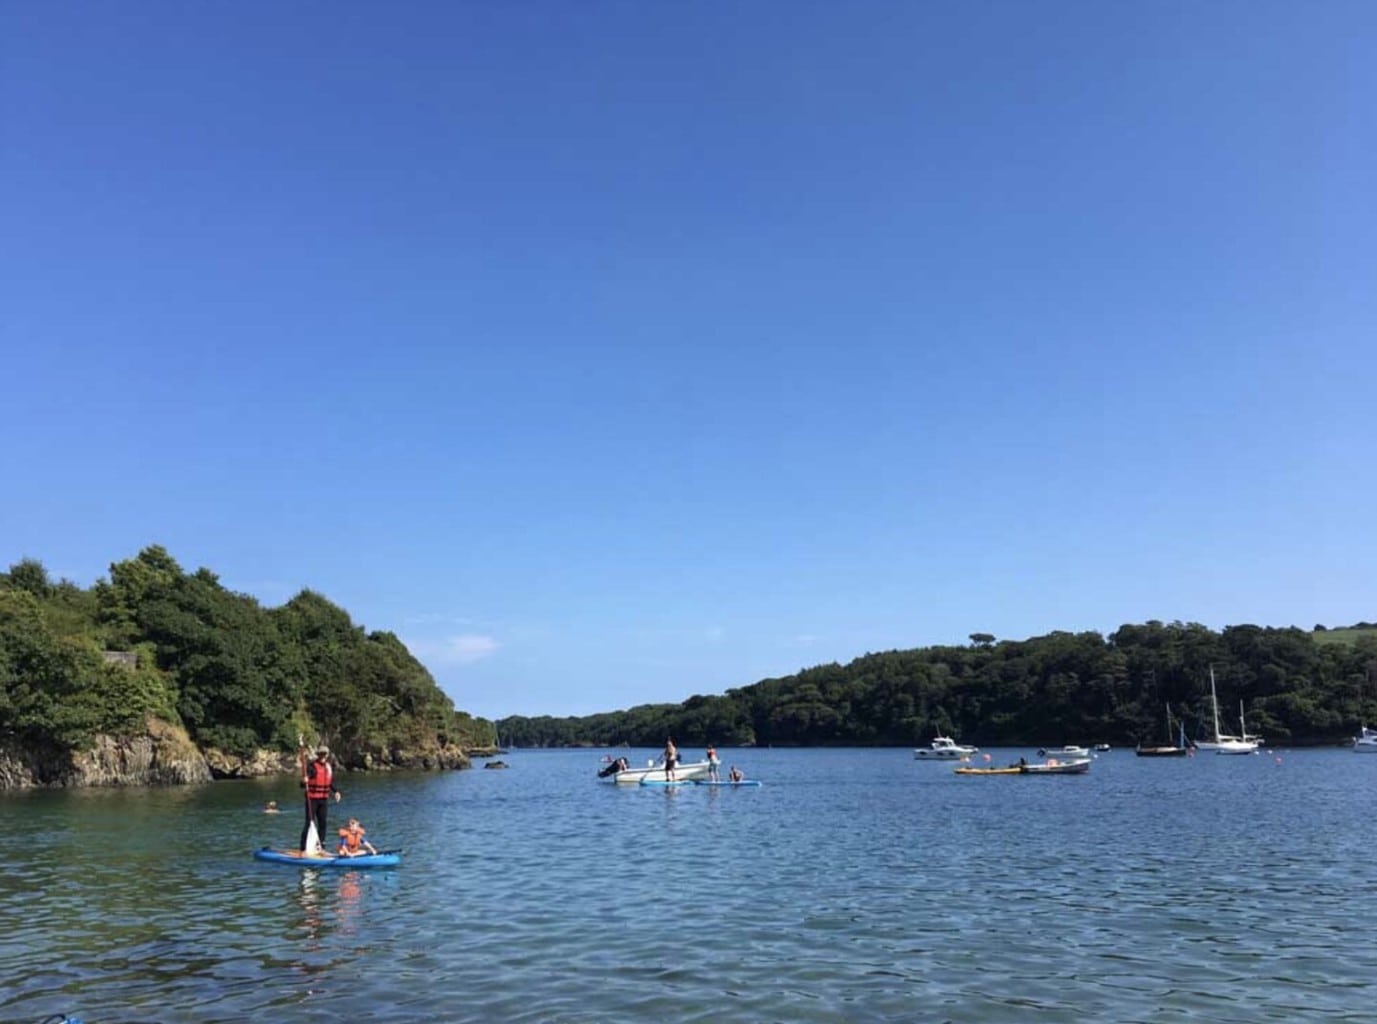 The River Helford